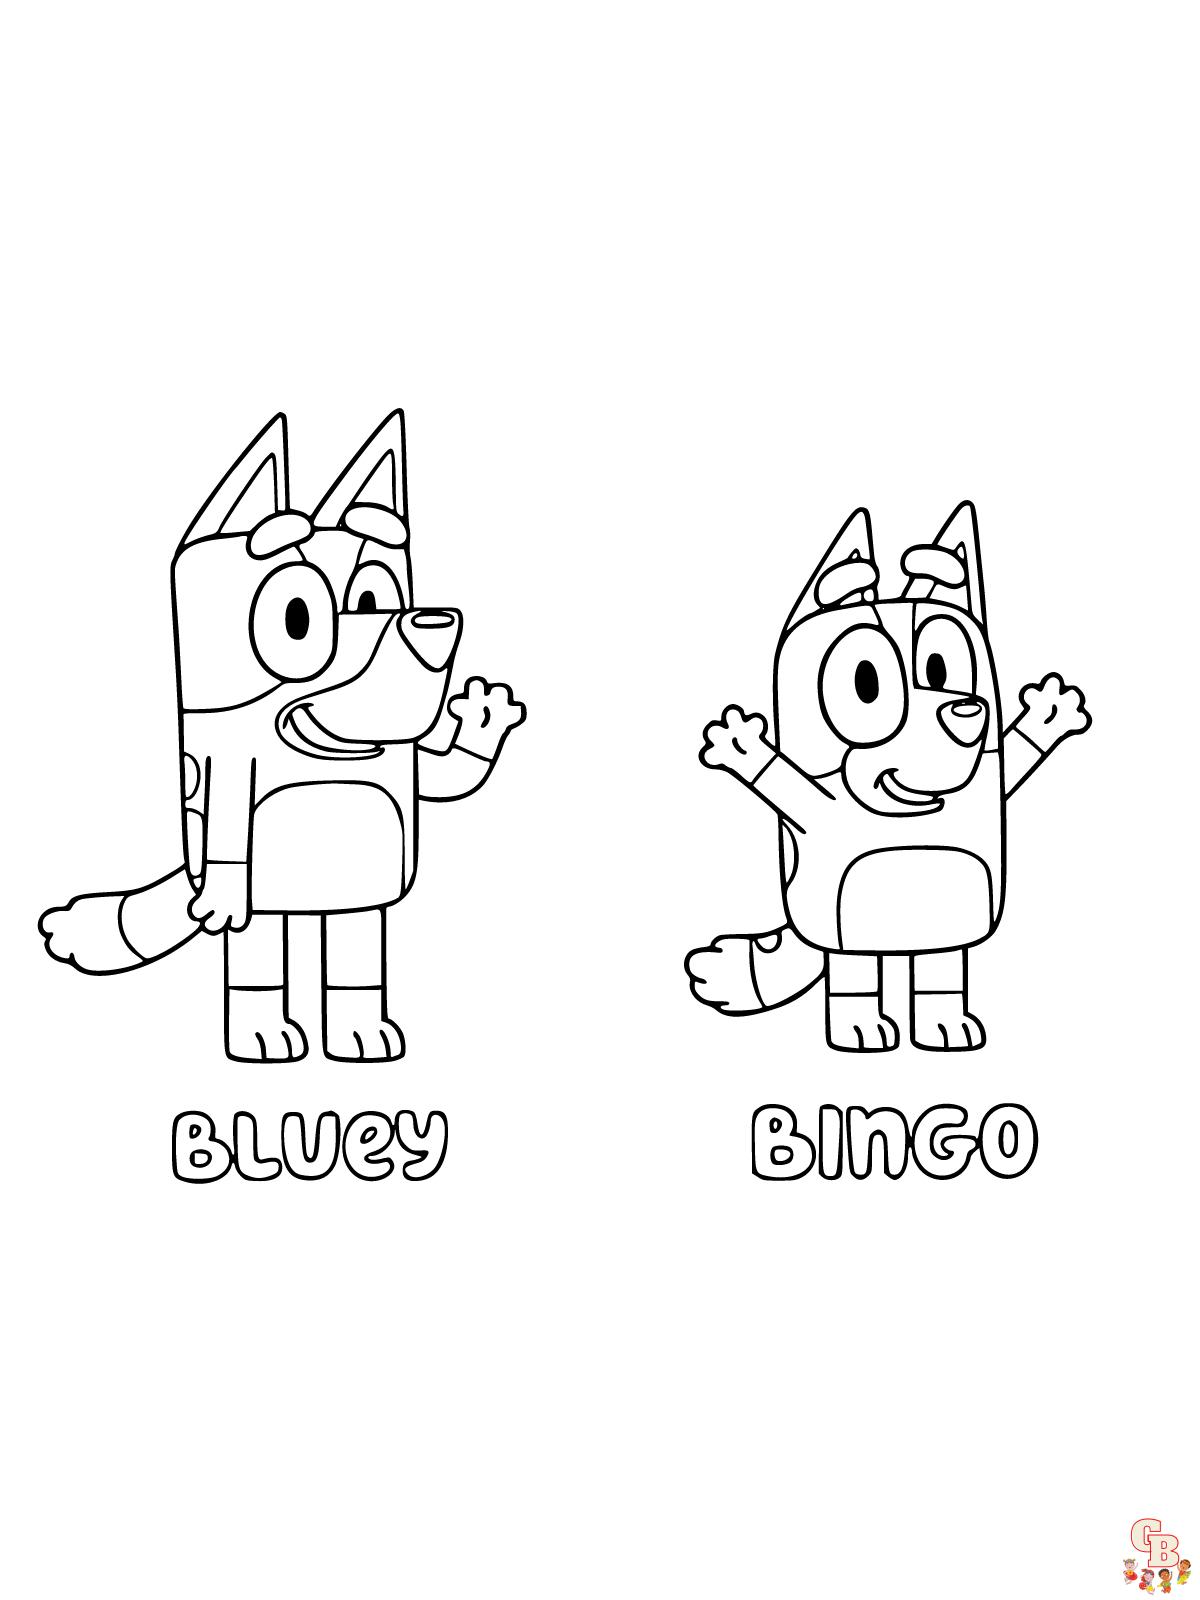 bluey and bingo coloring page free